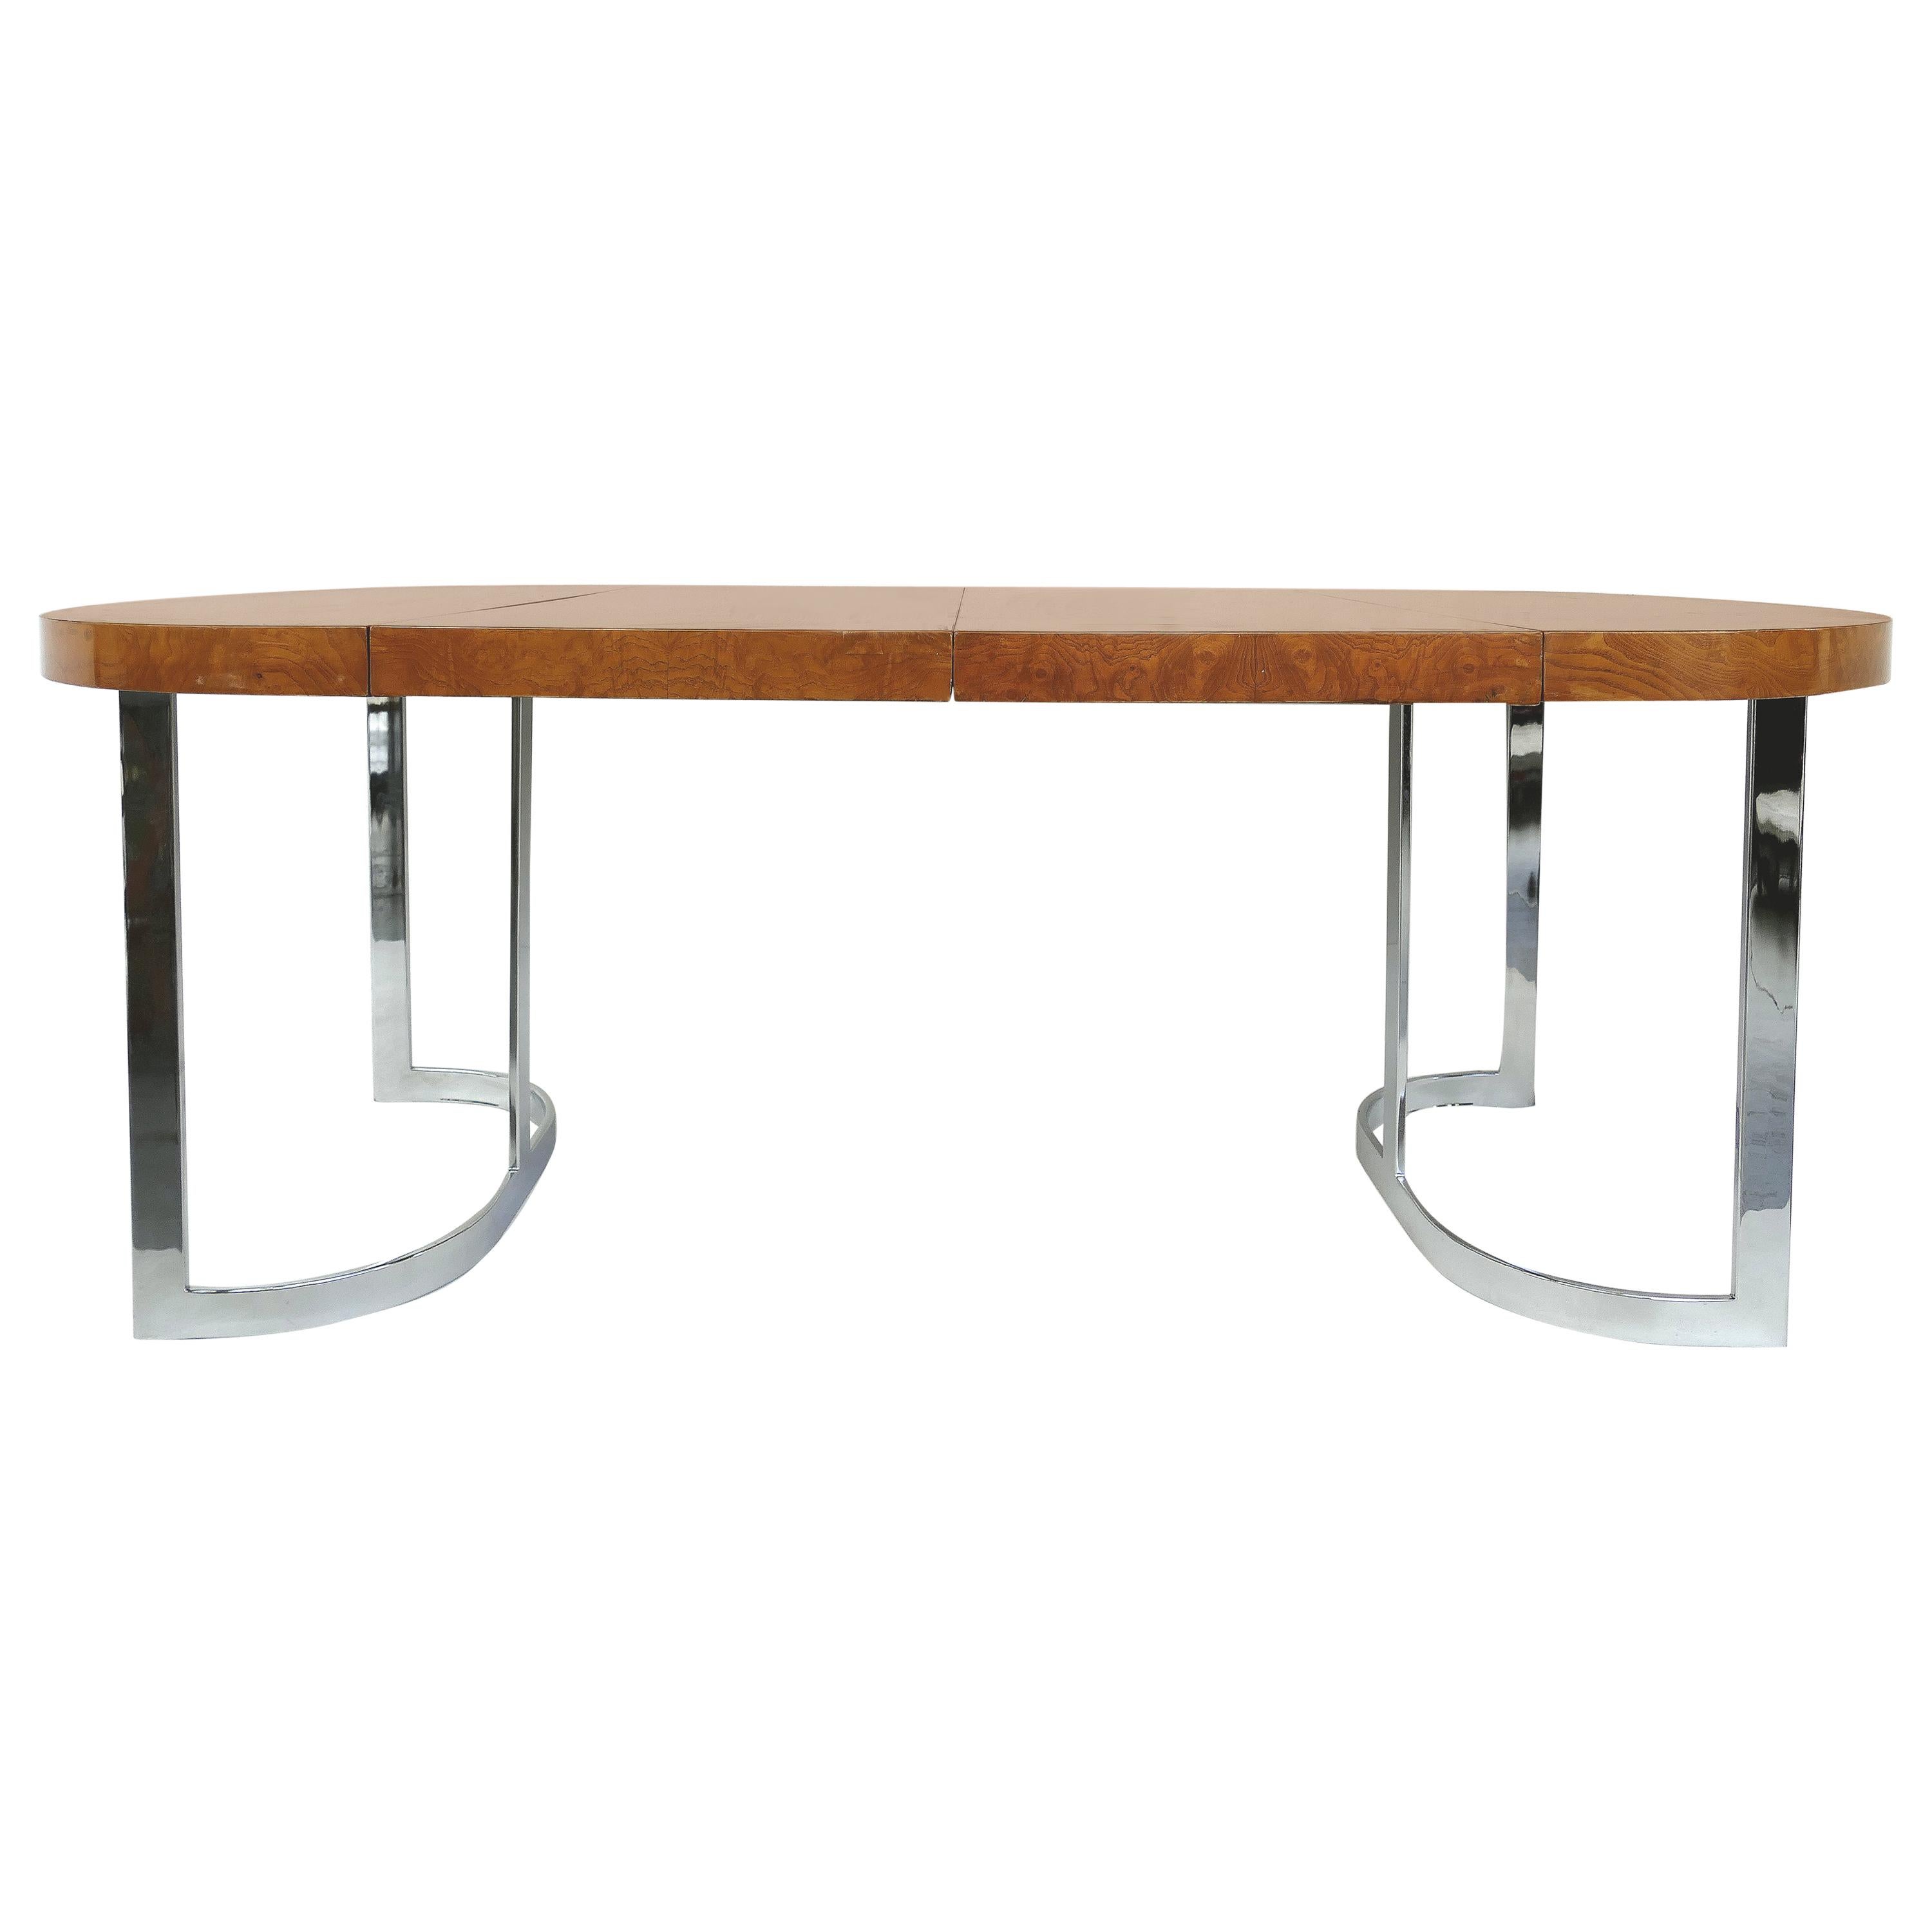 Leon Rosen Pace Collection Burl Wood Dining Table with Stainless Steel Legs